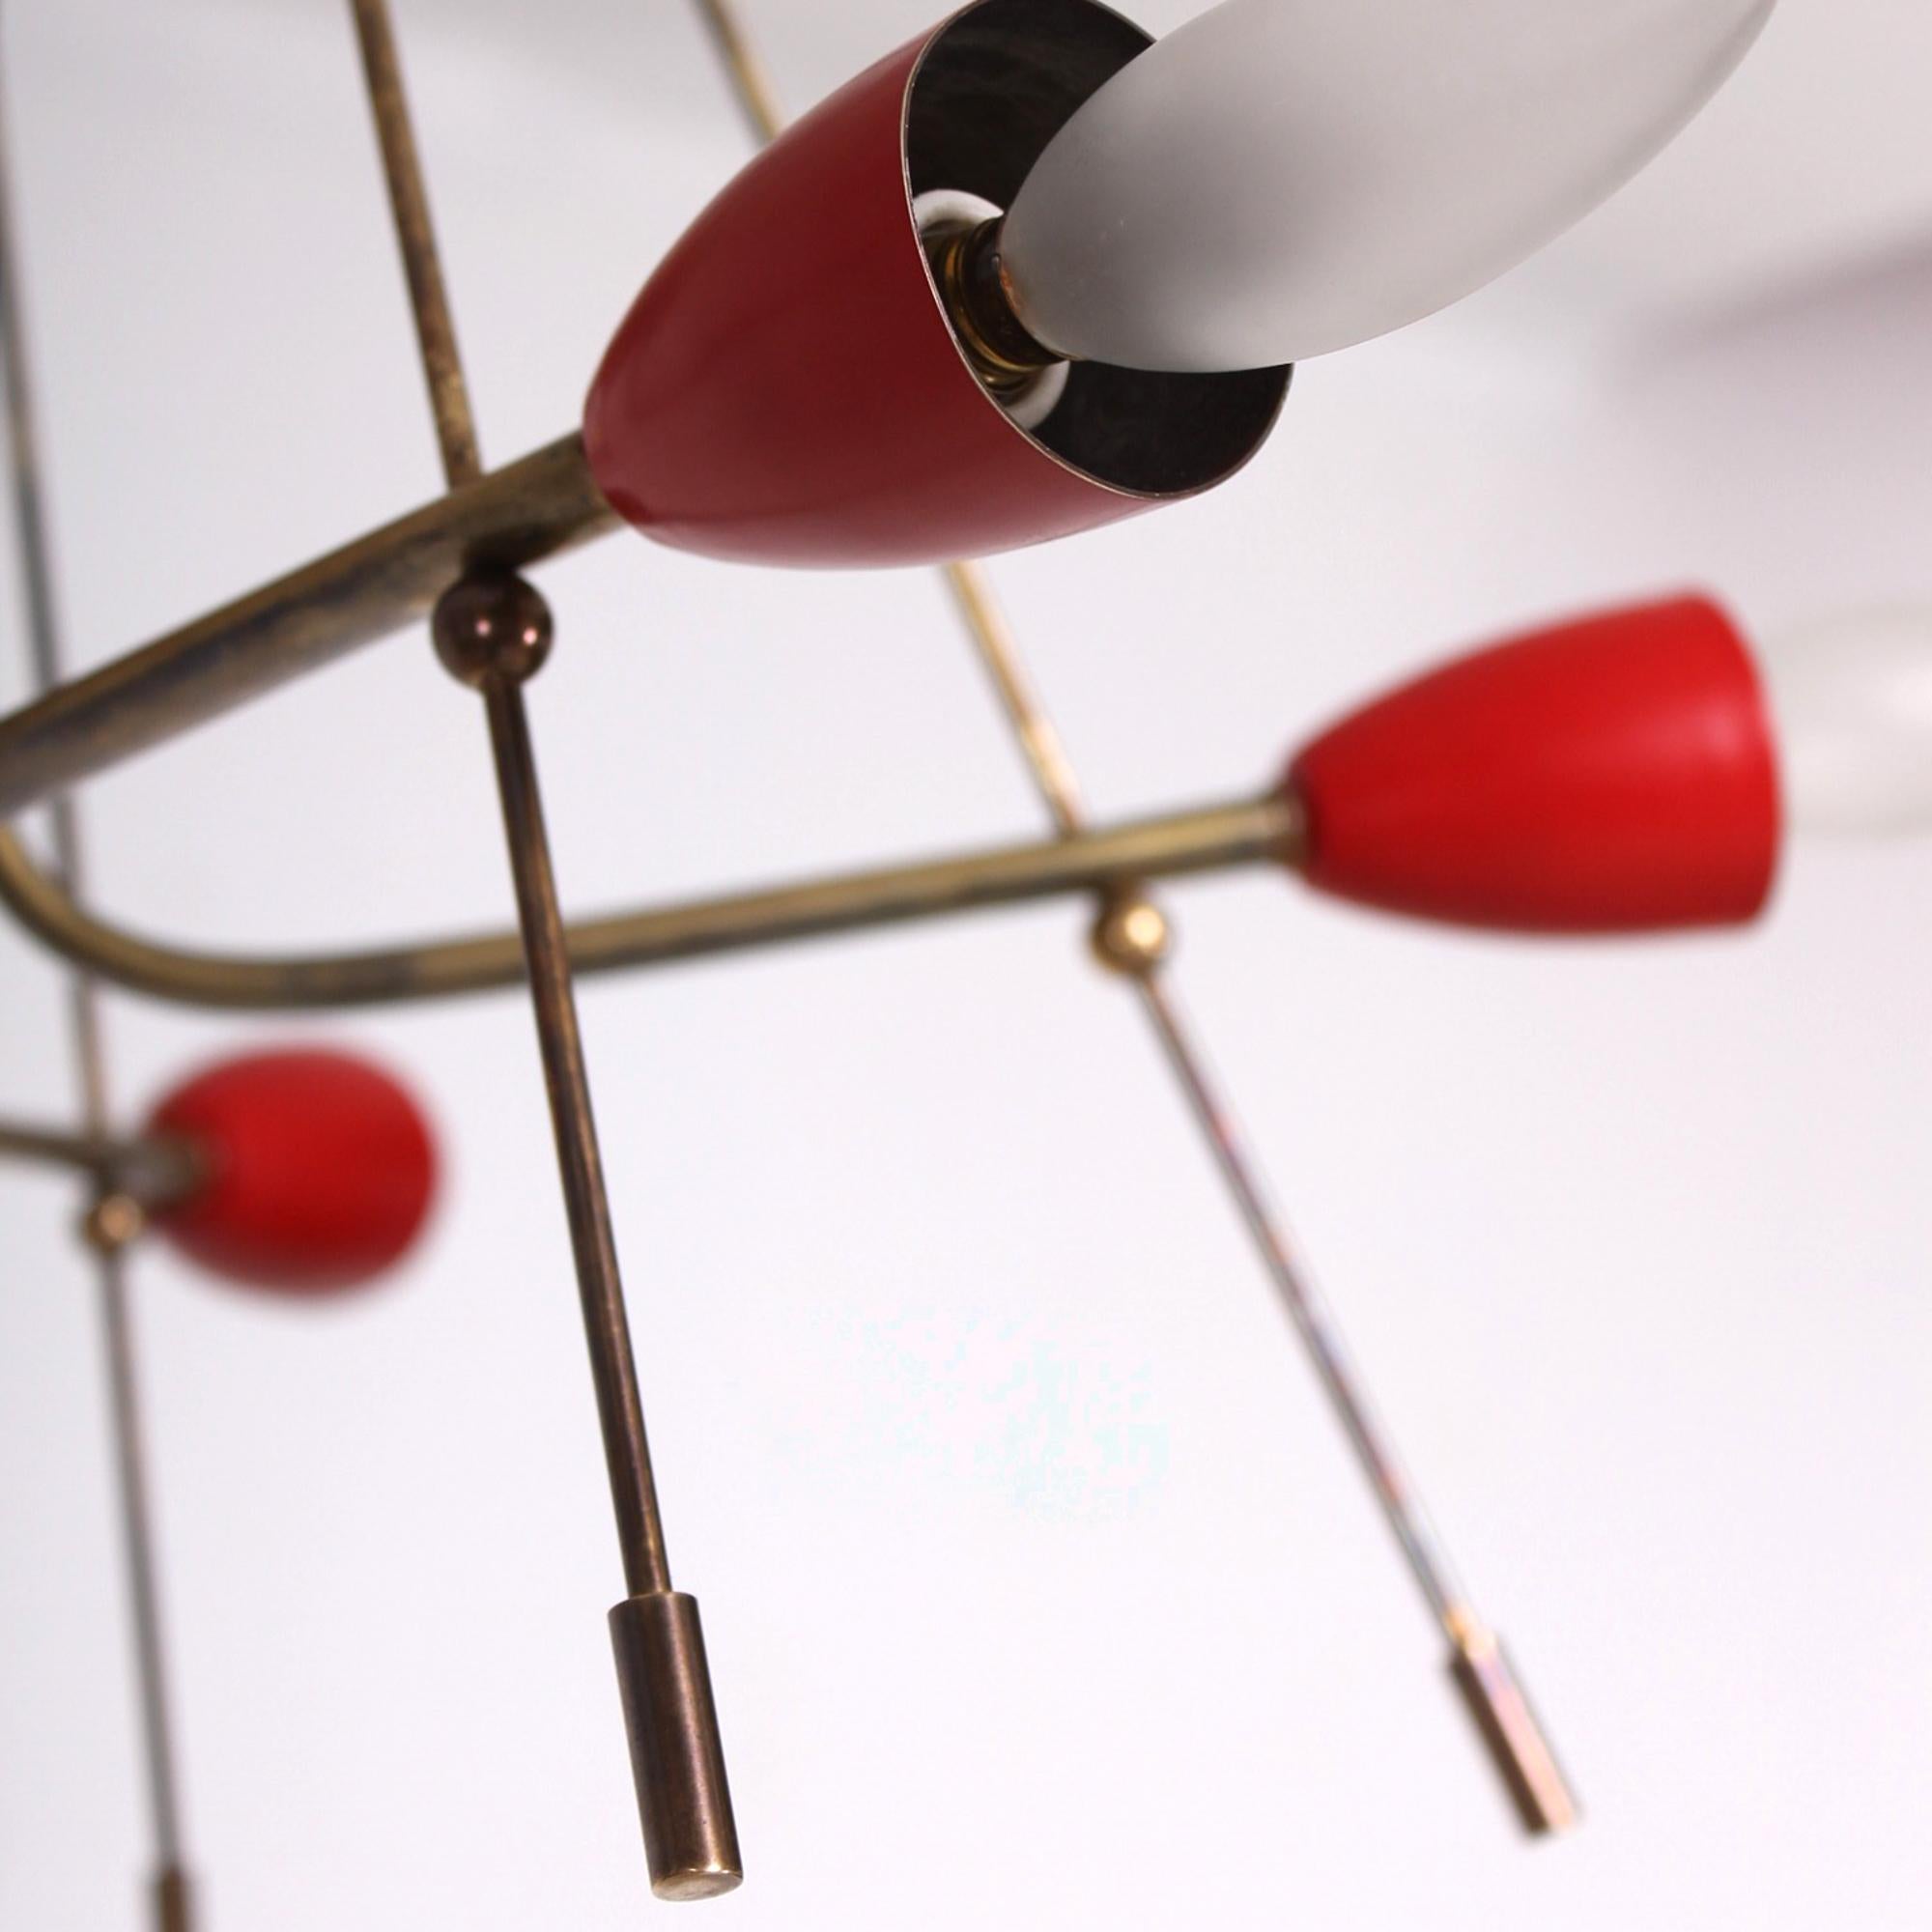 Mid-20th Century STILNOVO Atomic Futuristic Solid Brass Chandelier Painted Red Italy 1950s